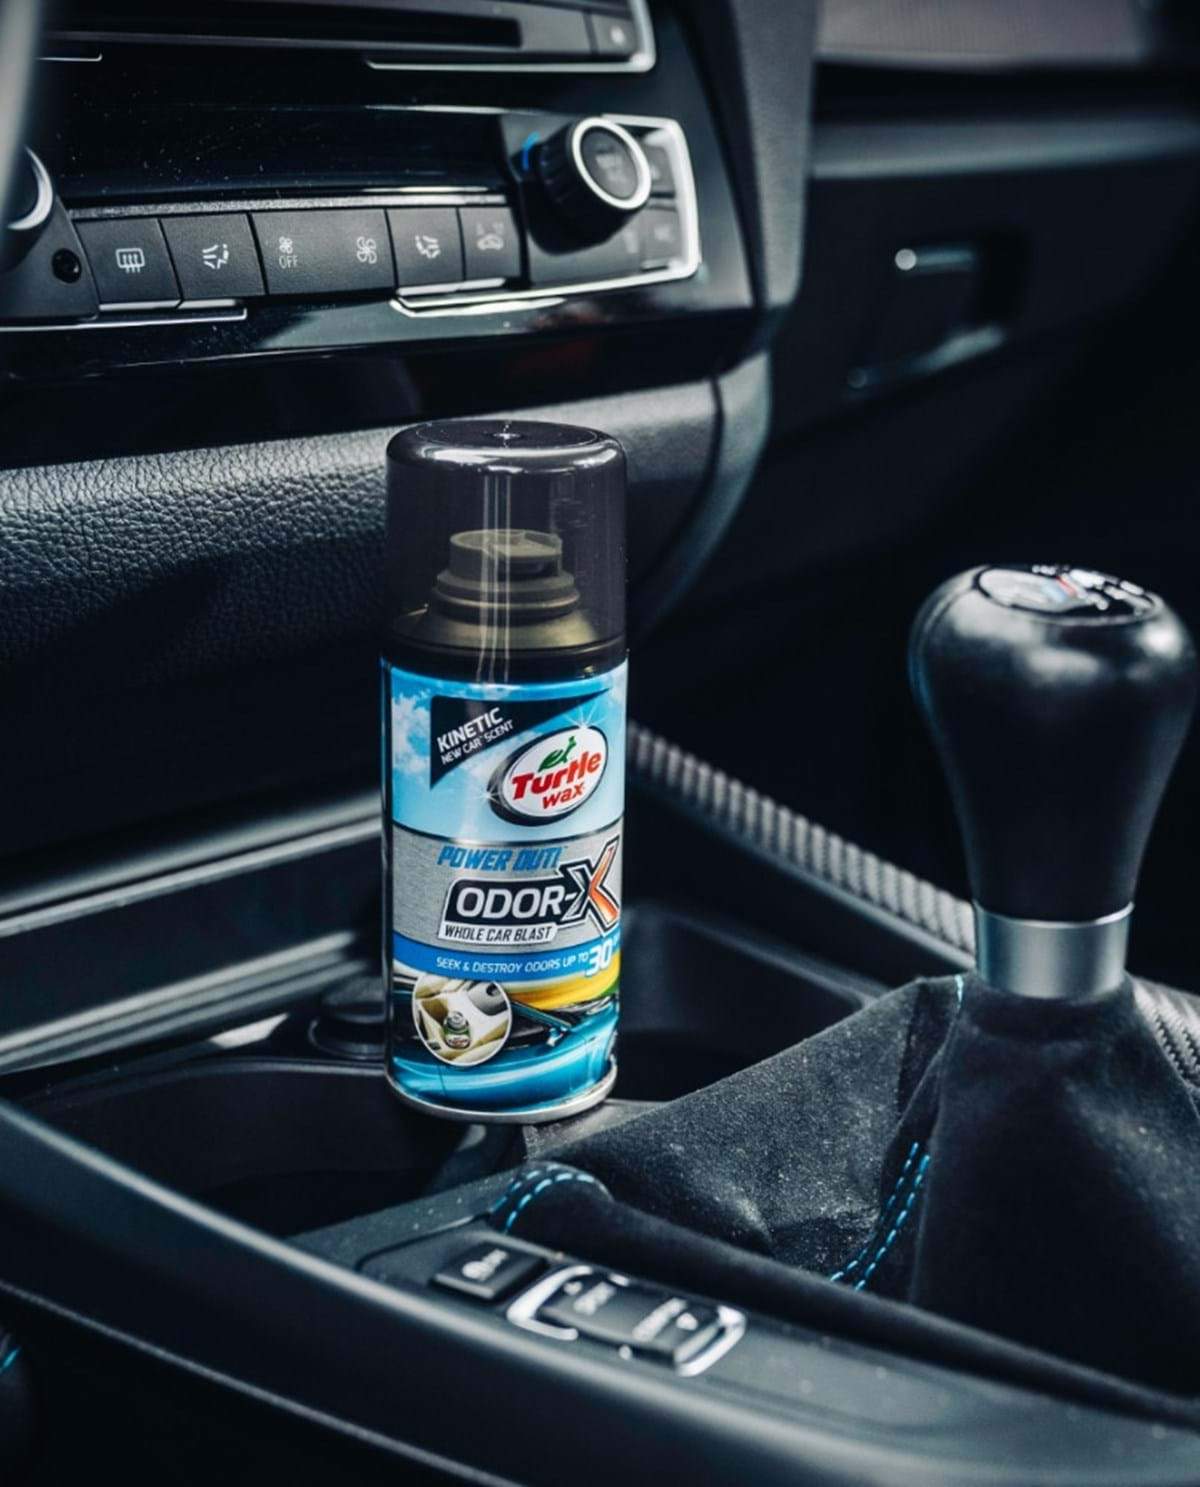 3 Steps for Removing Smells from Cars